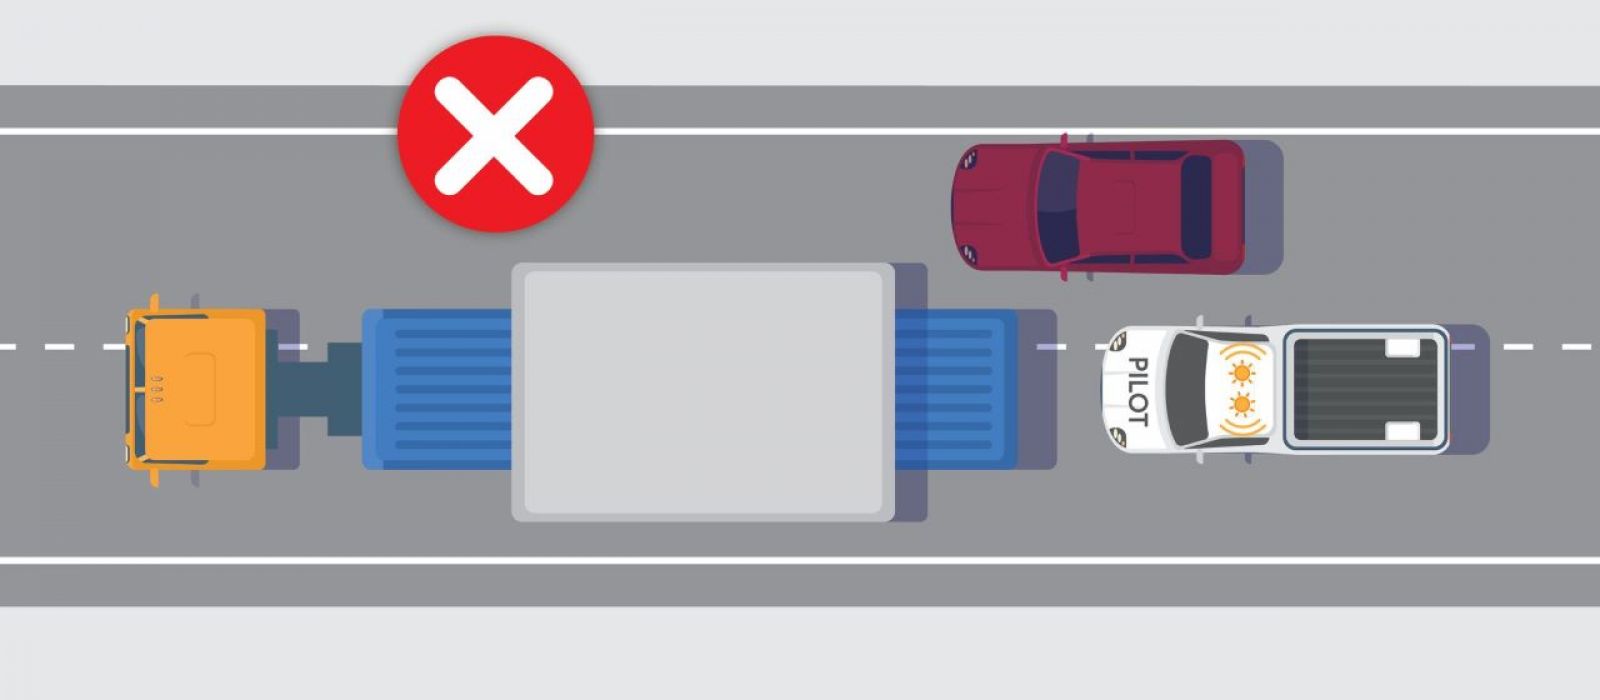 An infographic showing the incorrect way for a driver to overtake a truck carrying an oversized load.